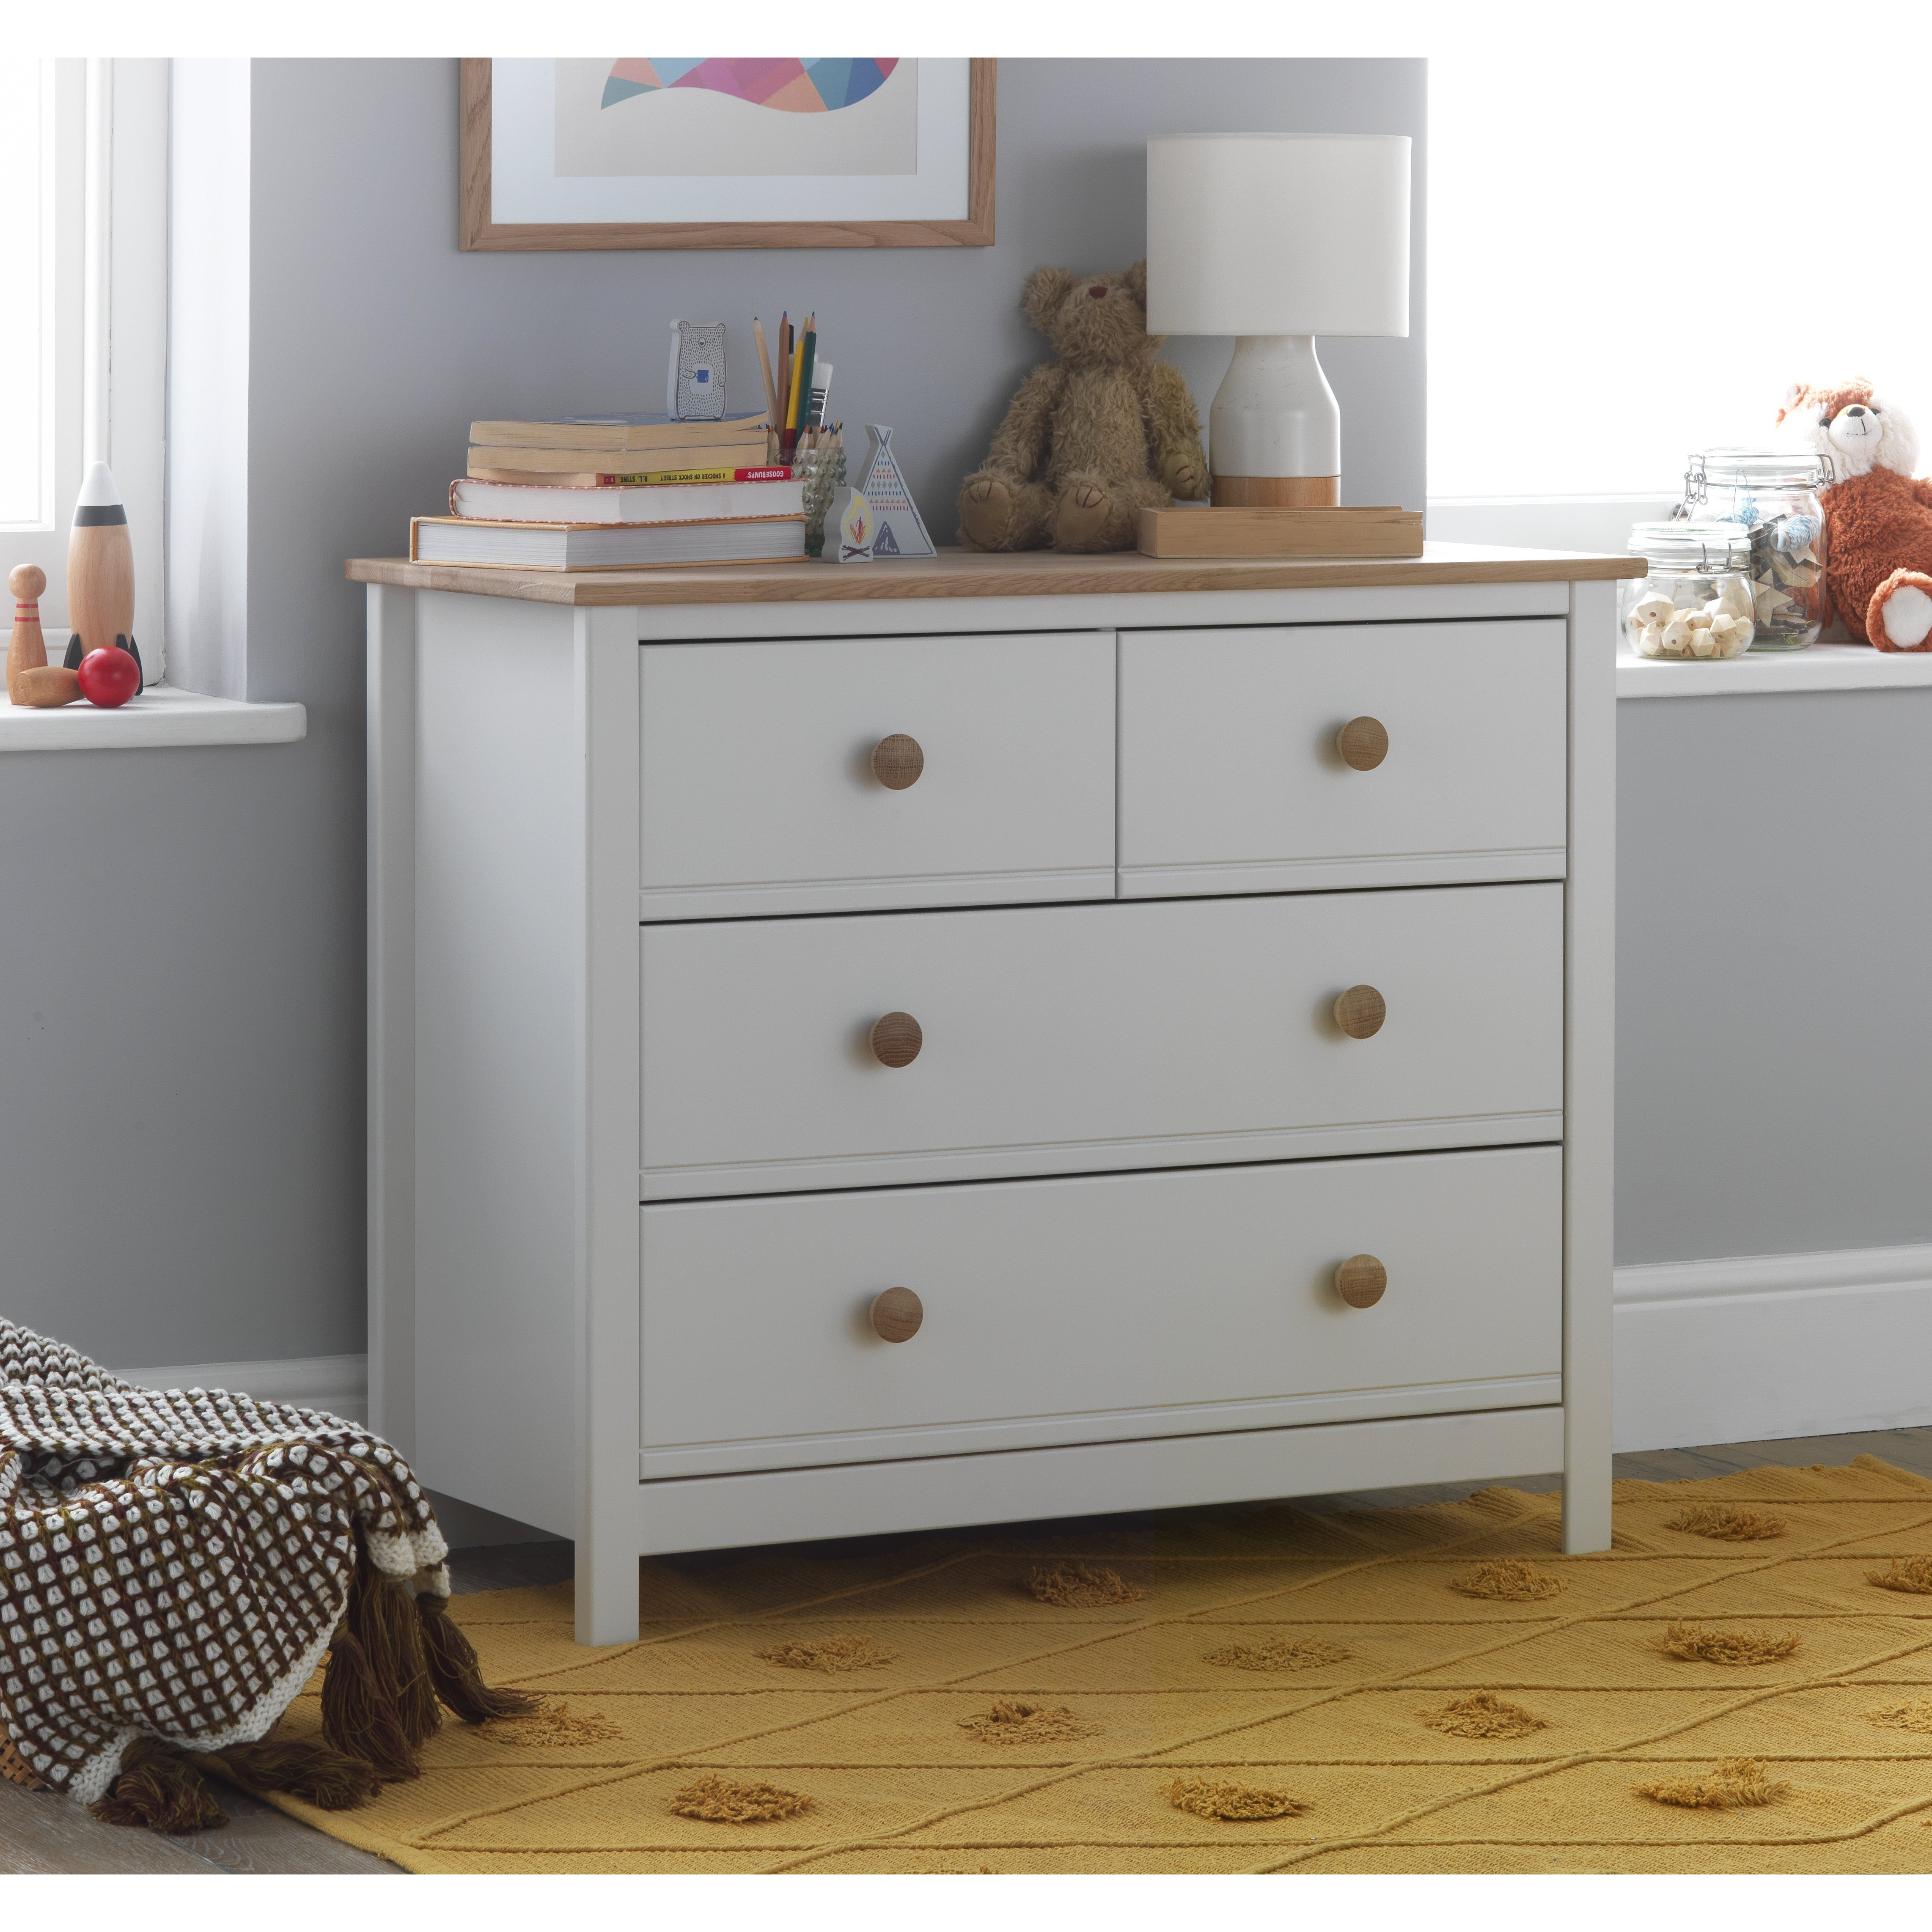 Habitat Brooklyn 2+2 Chest of Drawers - White and Oak - image 1